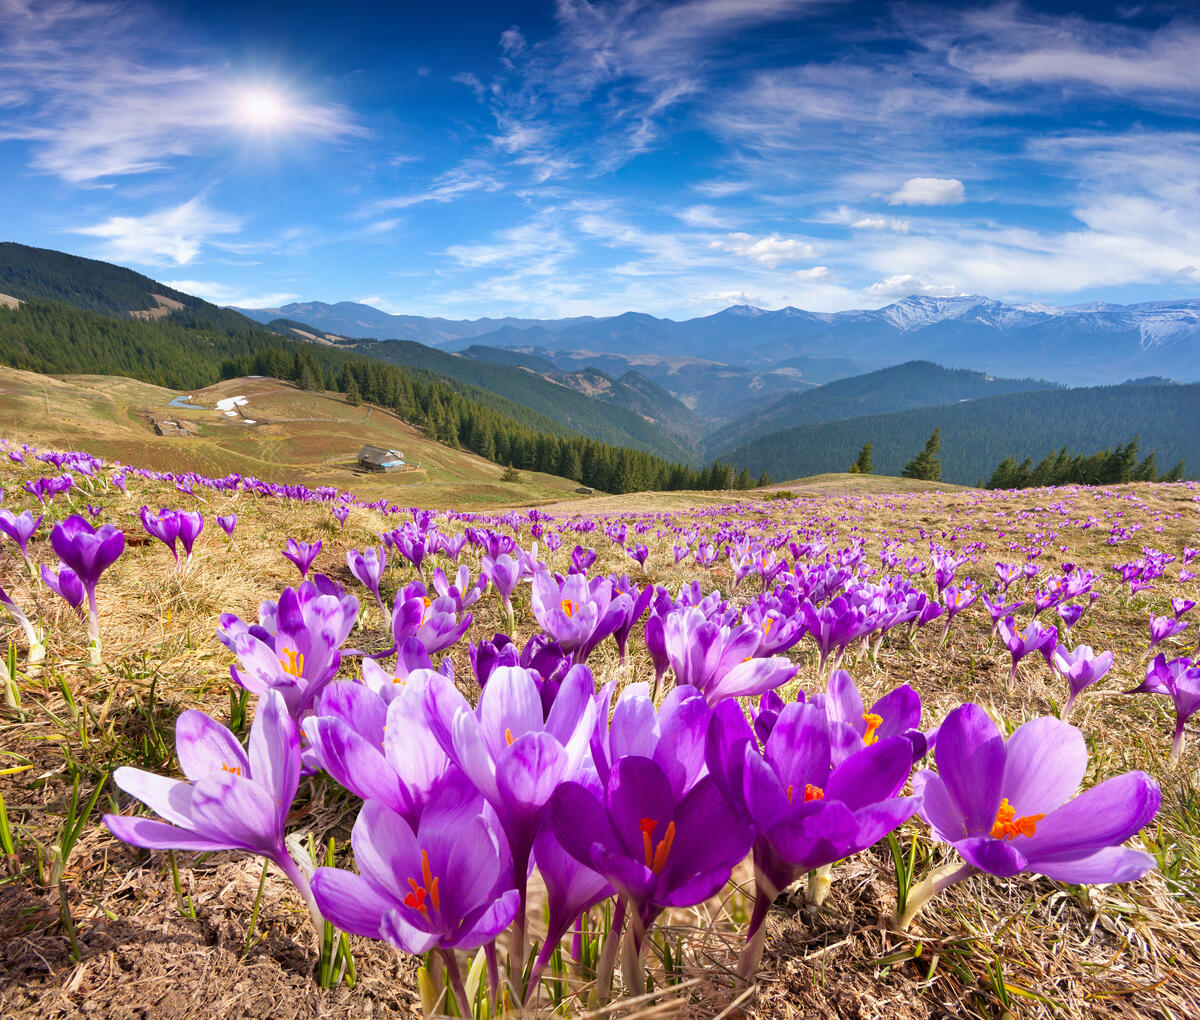 Pink crocuses in mountains